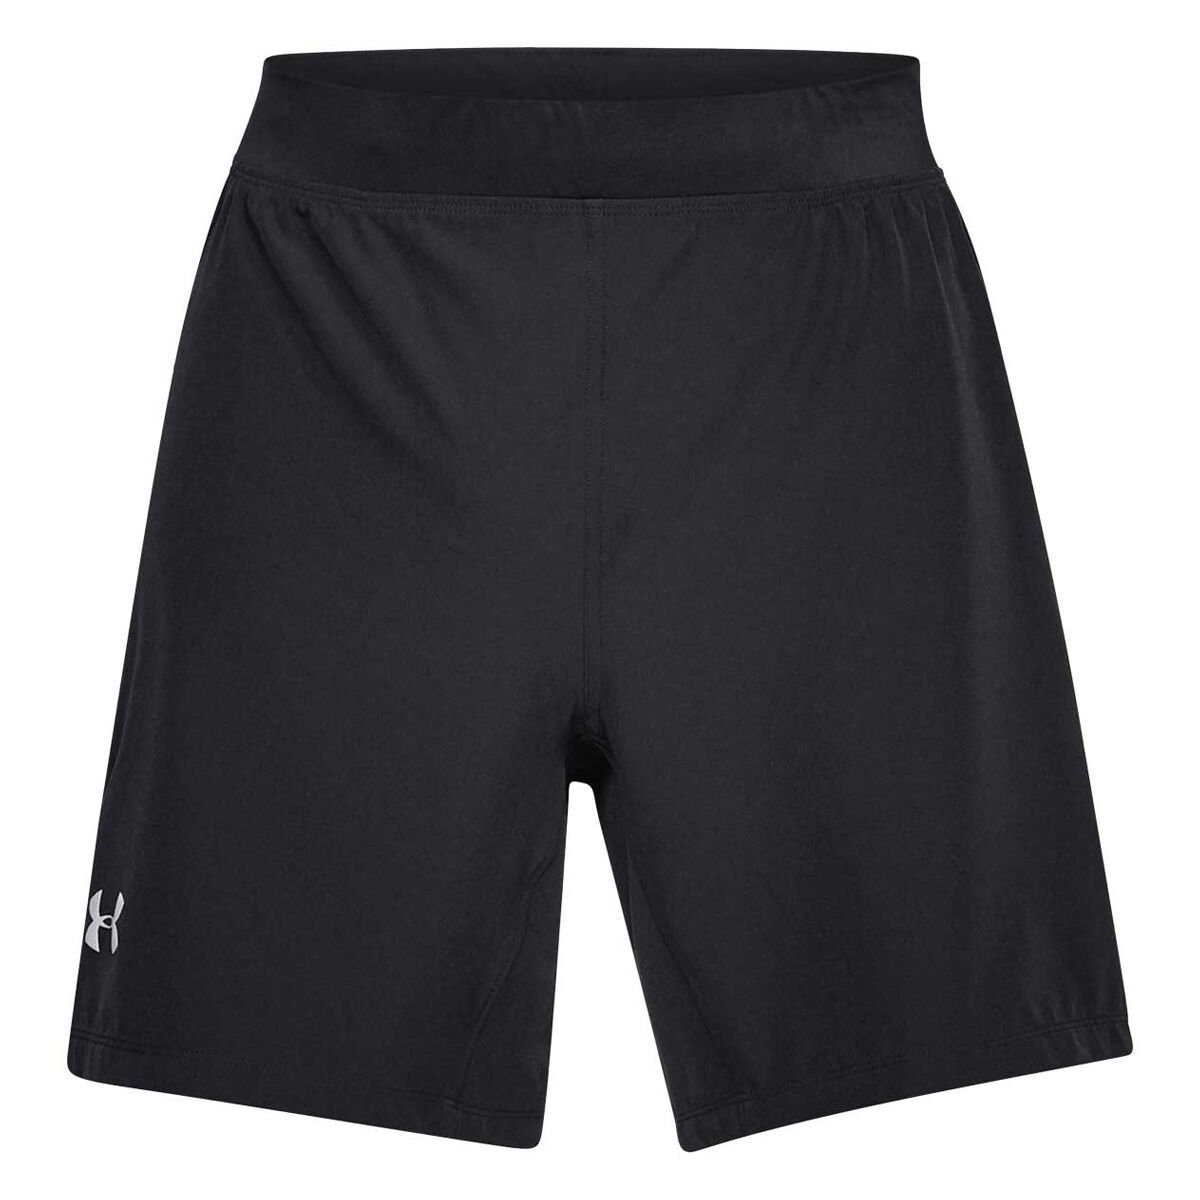 Under Armour Ultimate Childrens Shorts